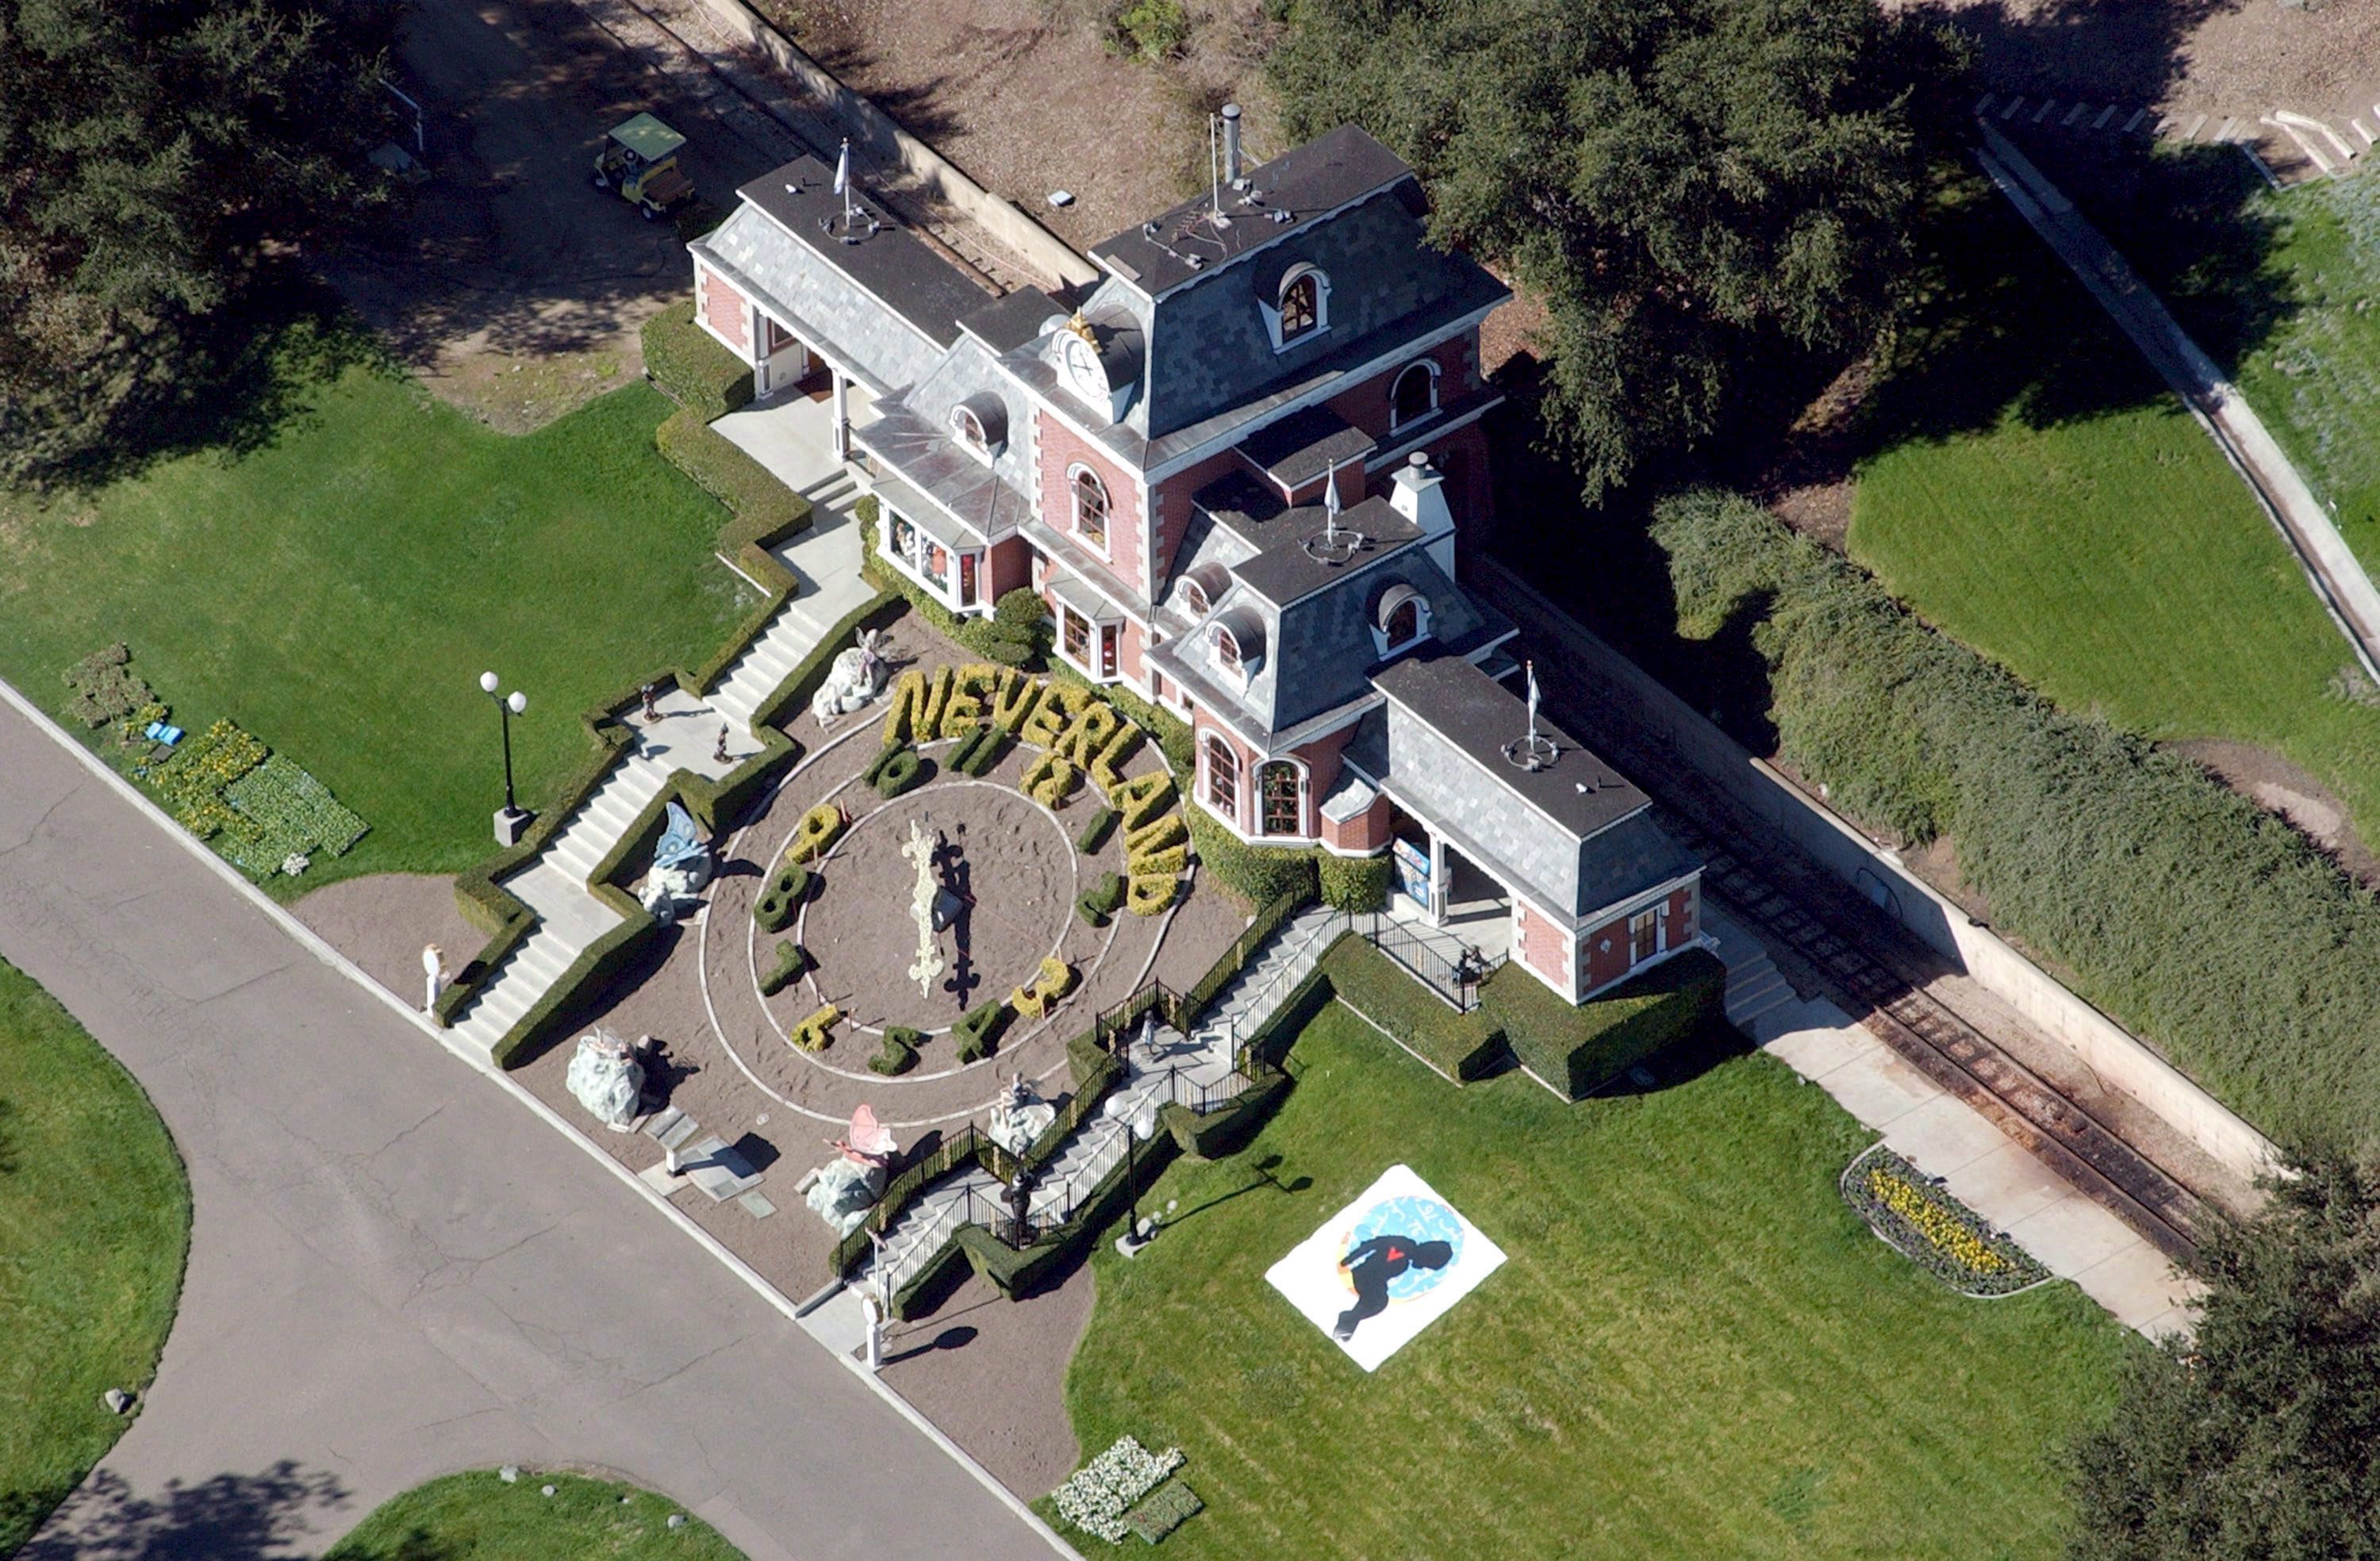 epa01268321 (FILES) An aerial view of the Neverland Ranch of US pop singer  Michael Jackson in Santa Ynez,  20 November 2003. Former popstar Michael Jackson could lose his California Neverland Ranch next month if he does not settle a 25-million dollar debt by the middle of March 2008, local media reported, 26 February 2008. Neverland Ranch will be put up for sale at a public auction on 19 March 2008 unless the 24.5-million dollar debt on the property is settled, reported the Santa Maria Times. Jackson, 49, had bought the lavish 2,800-acre estate in the hills of Santa Maria in 1987 for 30 million dollars, naming it after the island where children never grow up in Peter Pan stories.  EPA/ARMANDO ARORIYO